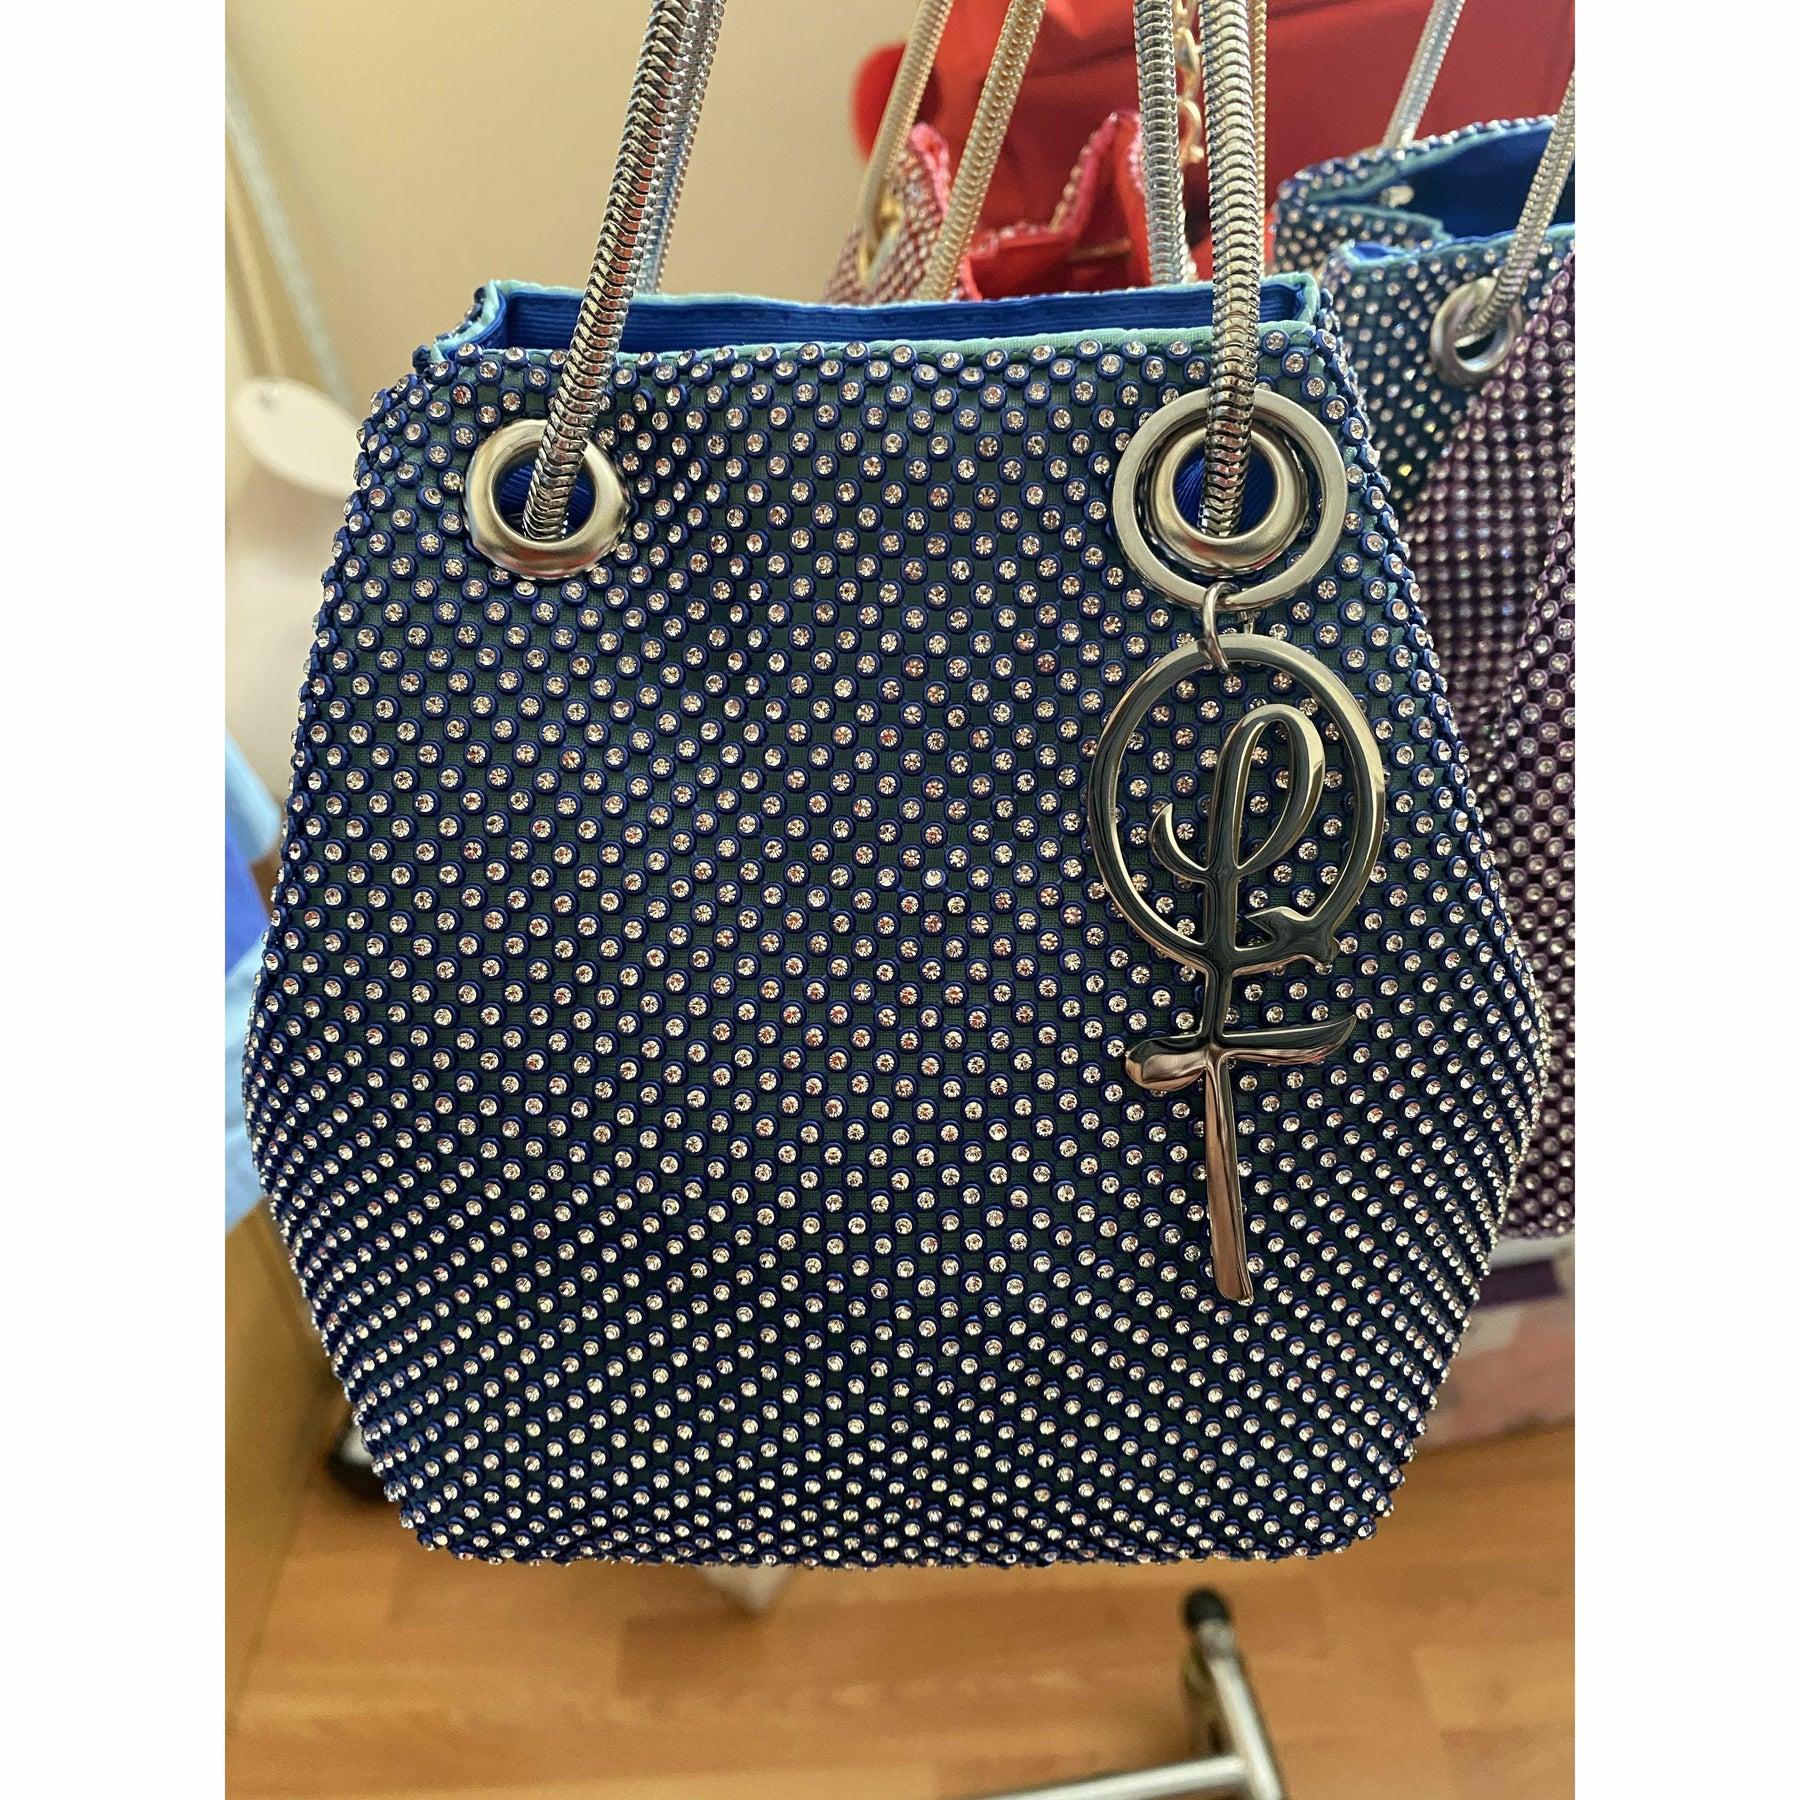 Royal Rhinestone Bucket Bag – The Queen's Lovely Things